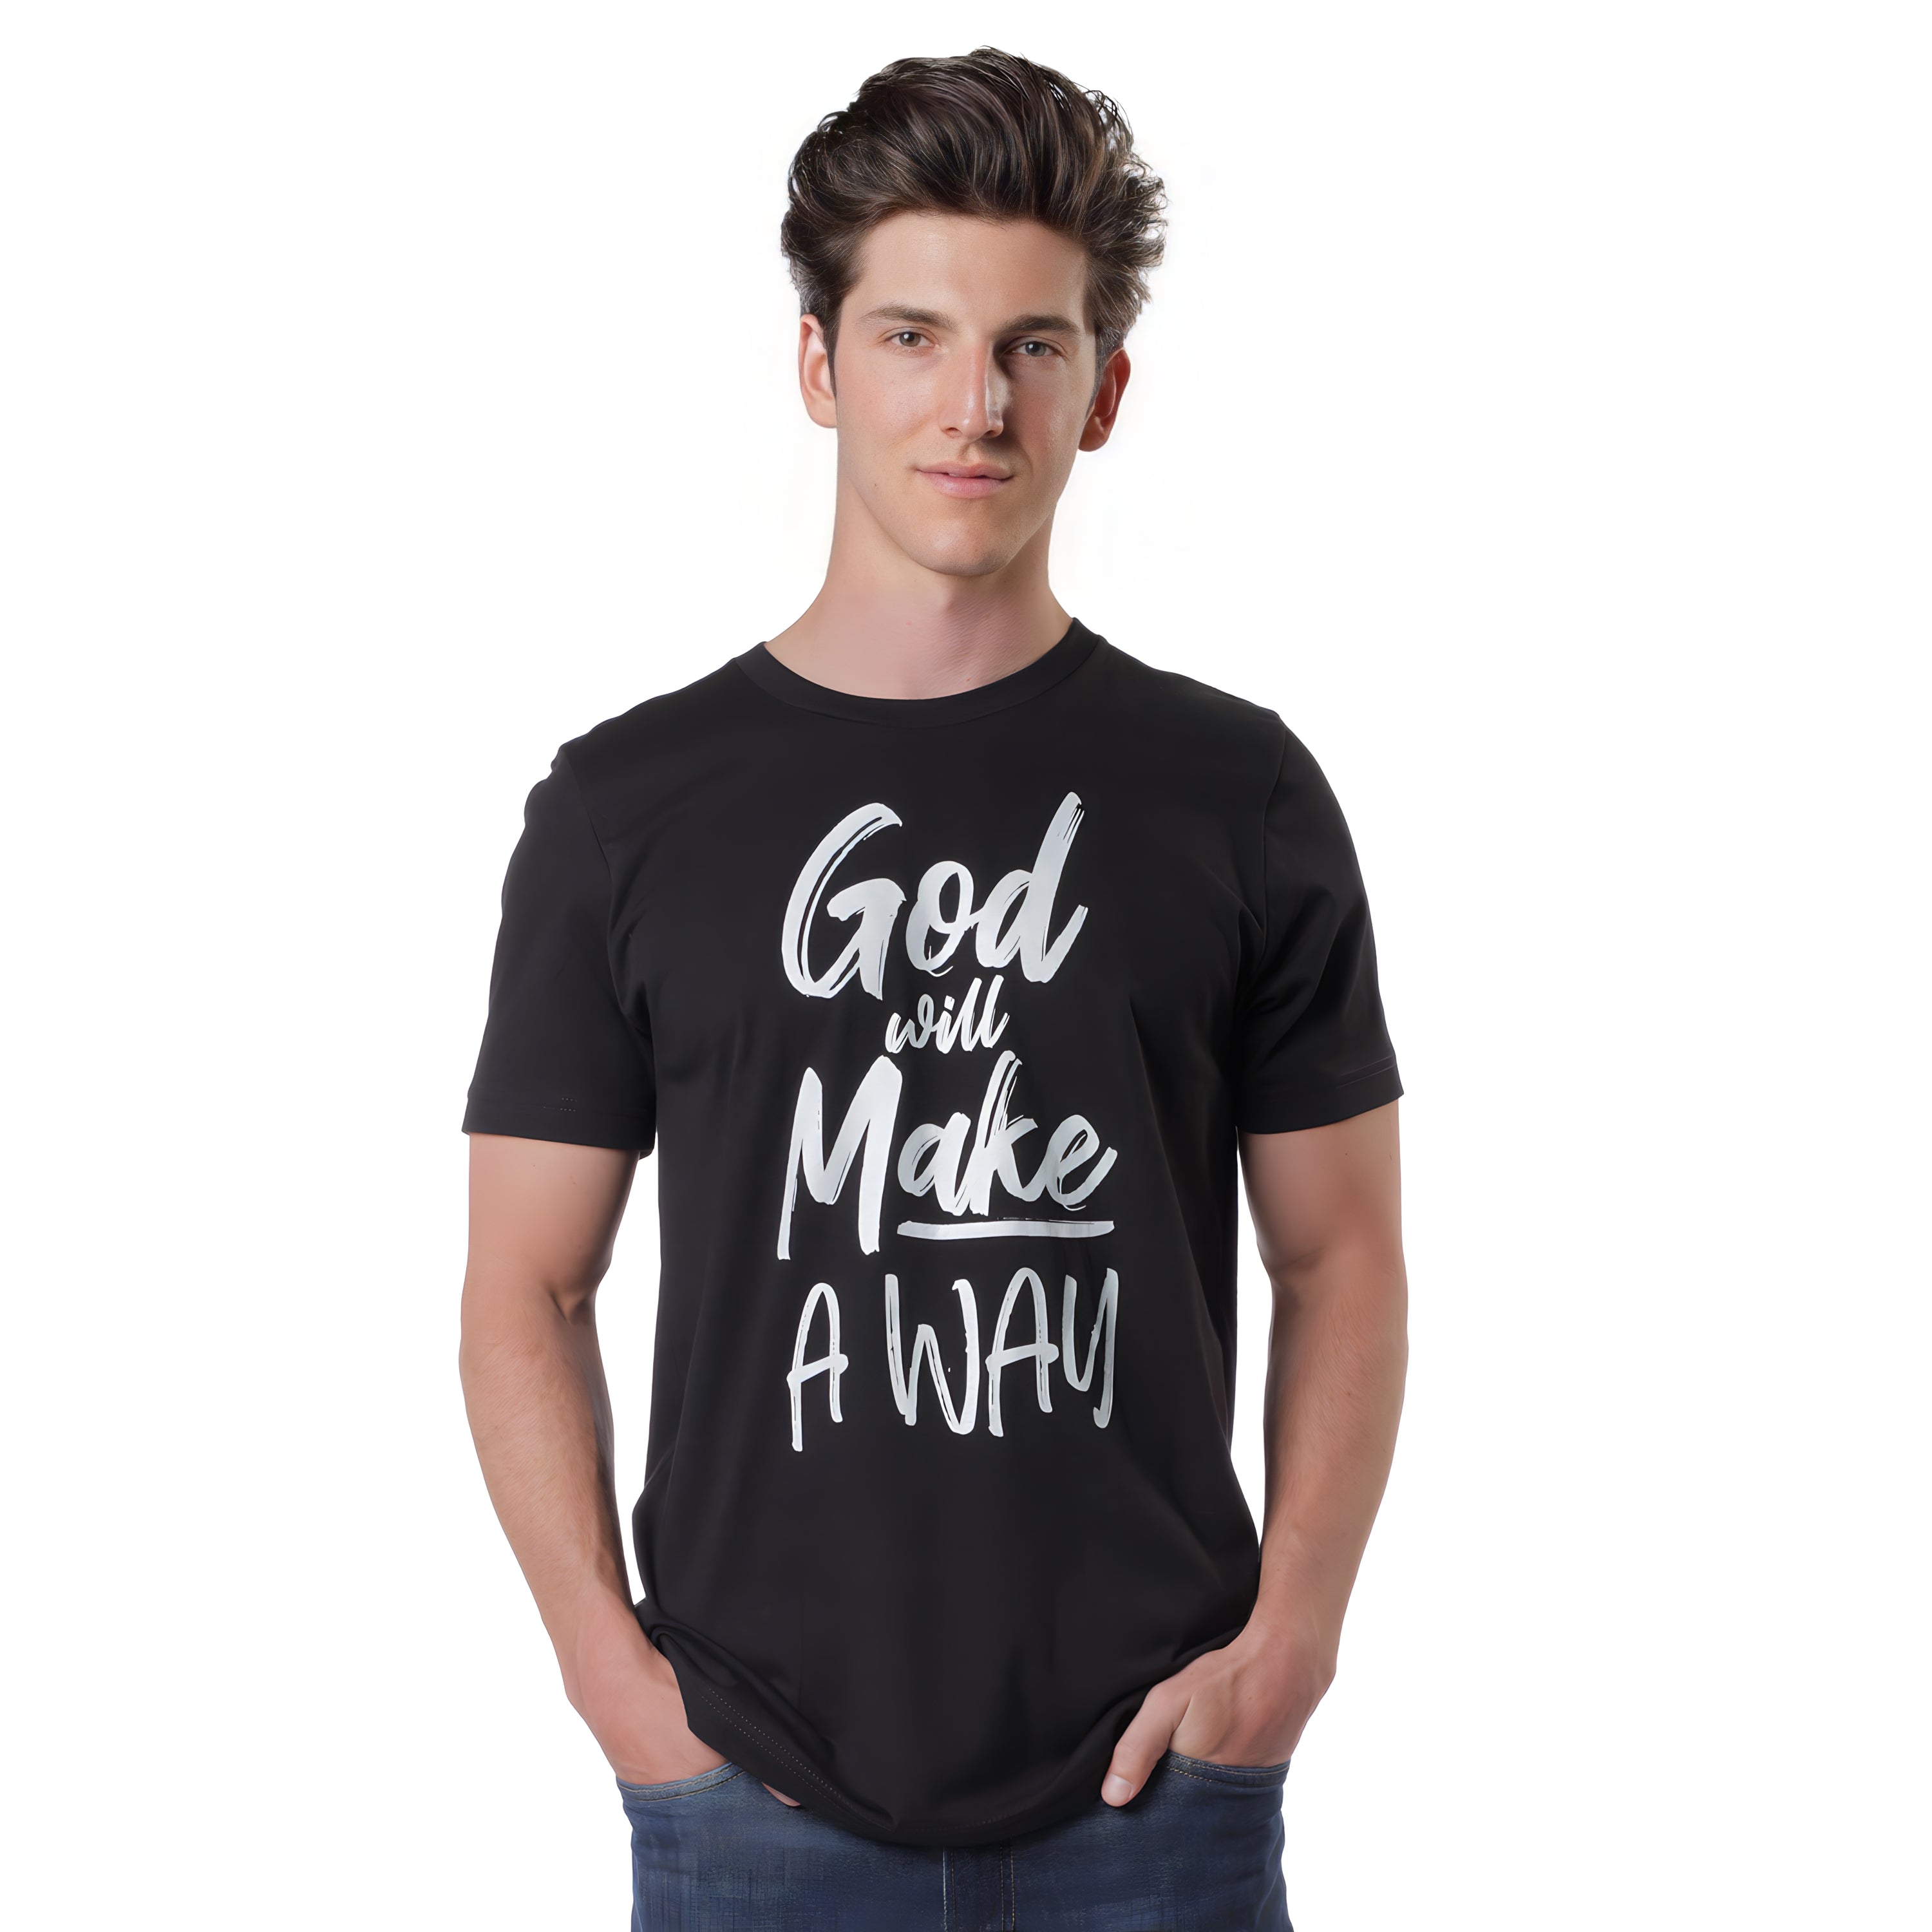 god will make a way, christian apparel, christian t-shirt, faith t-shirt, women's christian t-shirt, christian clothing brand, christian tee, faith tee, men's christian t-shirt, used by god, art of homage, god is dope, elevated faith, red letter clothing, reborn kings, god the father apparel